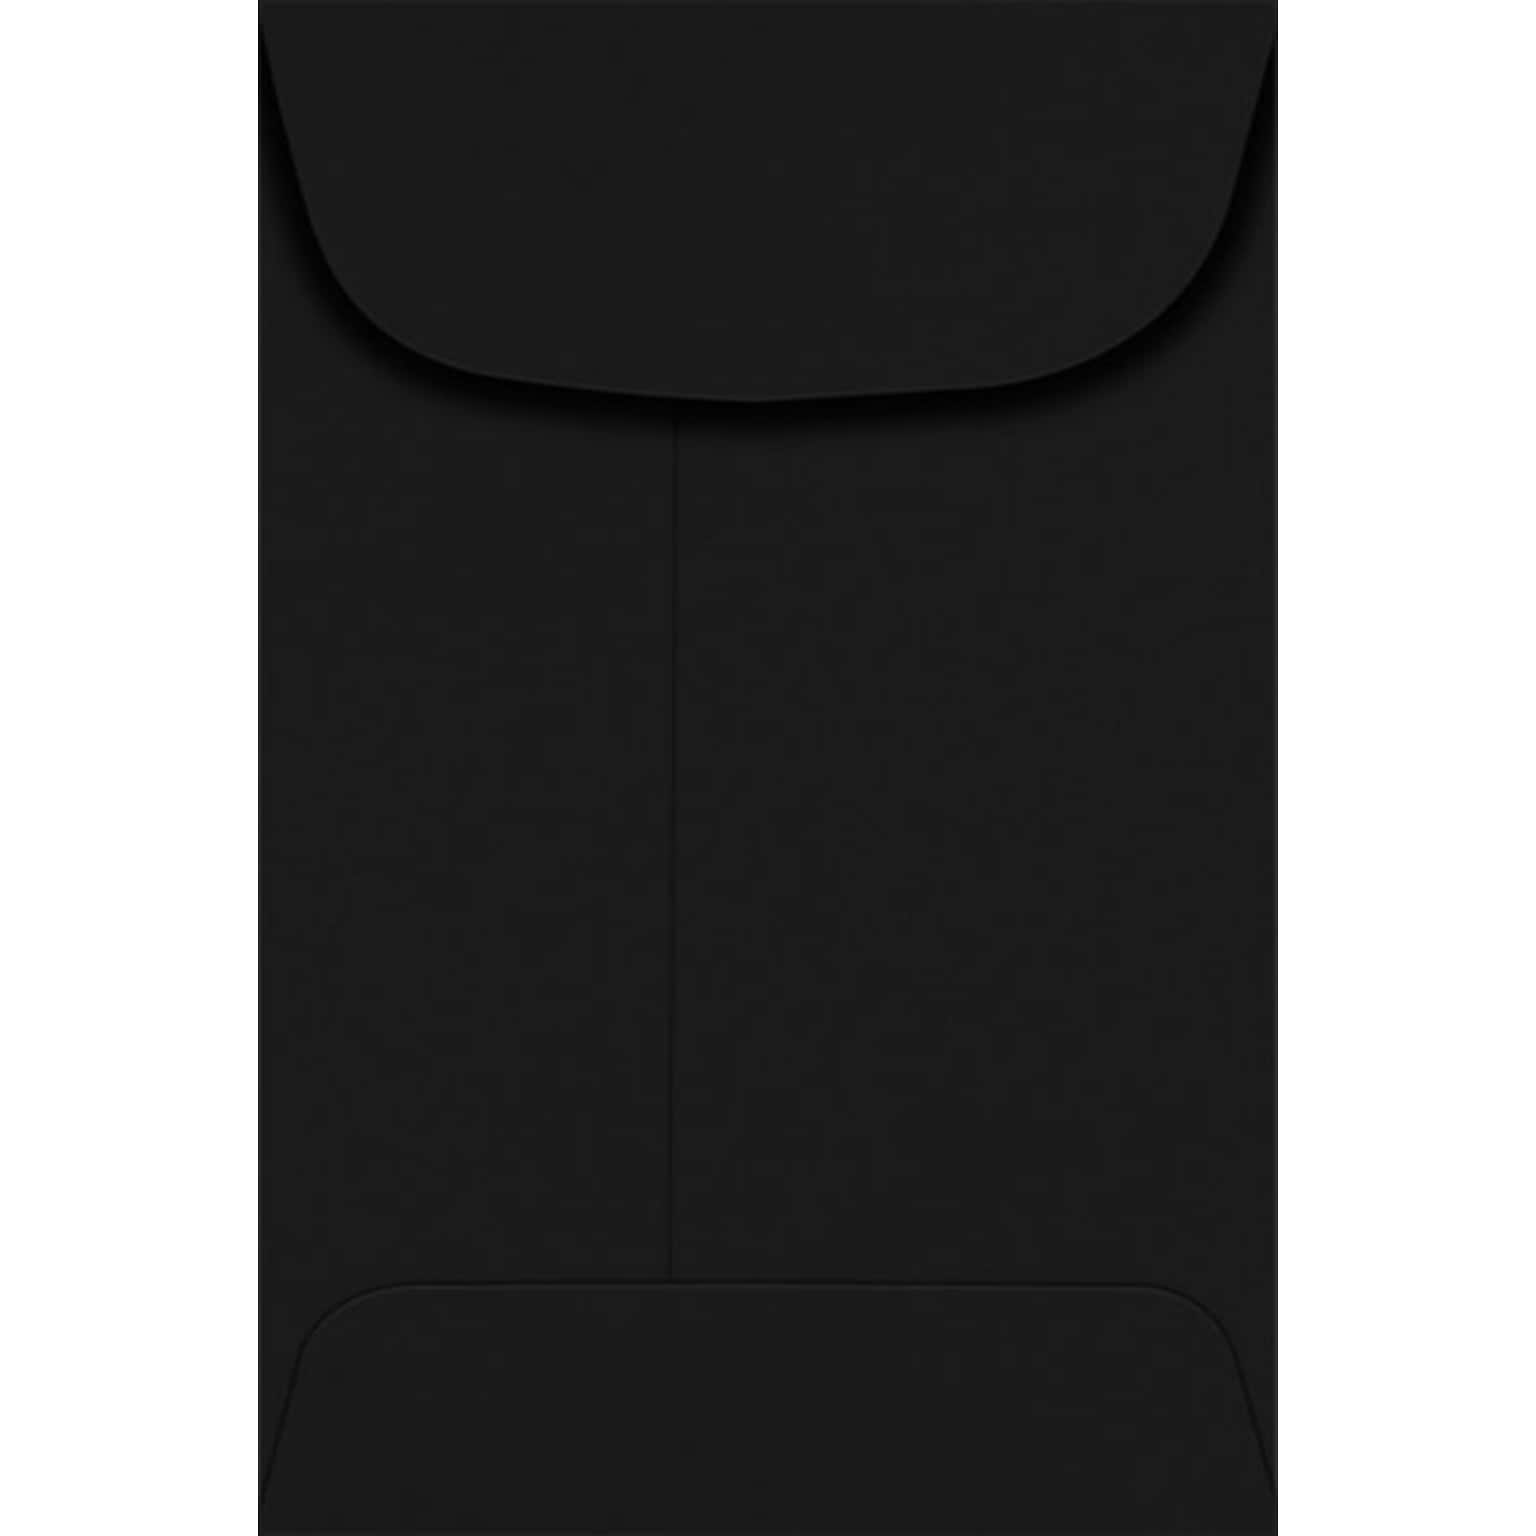 LUX #4 Coin Envelopes (3 x 4 1/2) - Midnight Black 1000/Pack, 80lb. Midnight Black (LUX-4CO-B-1000)